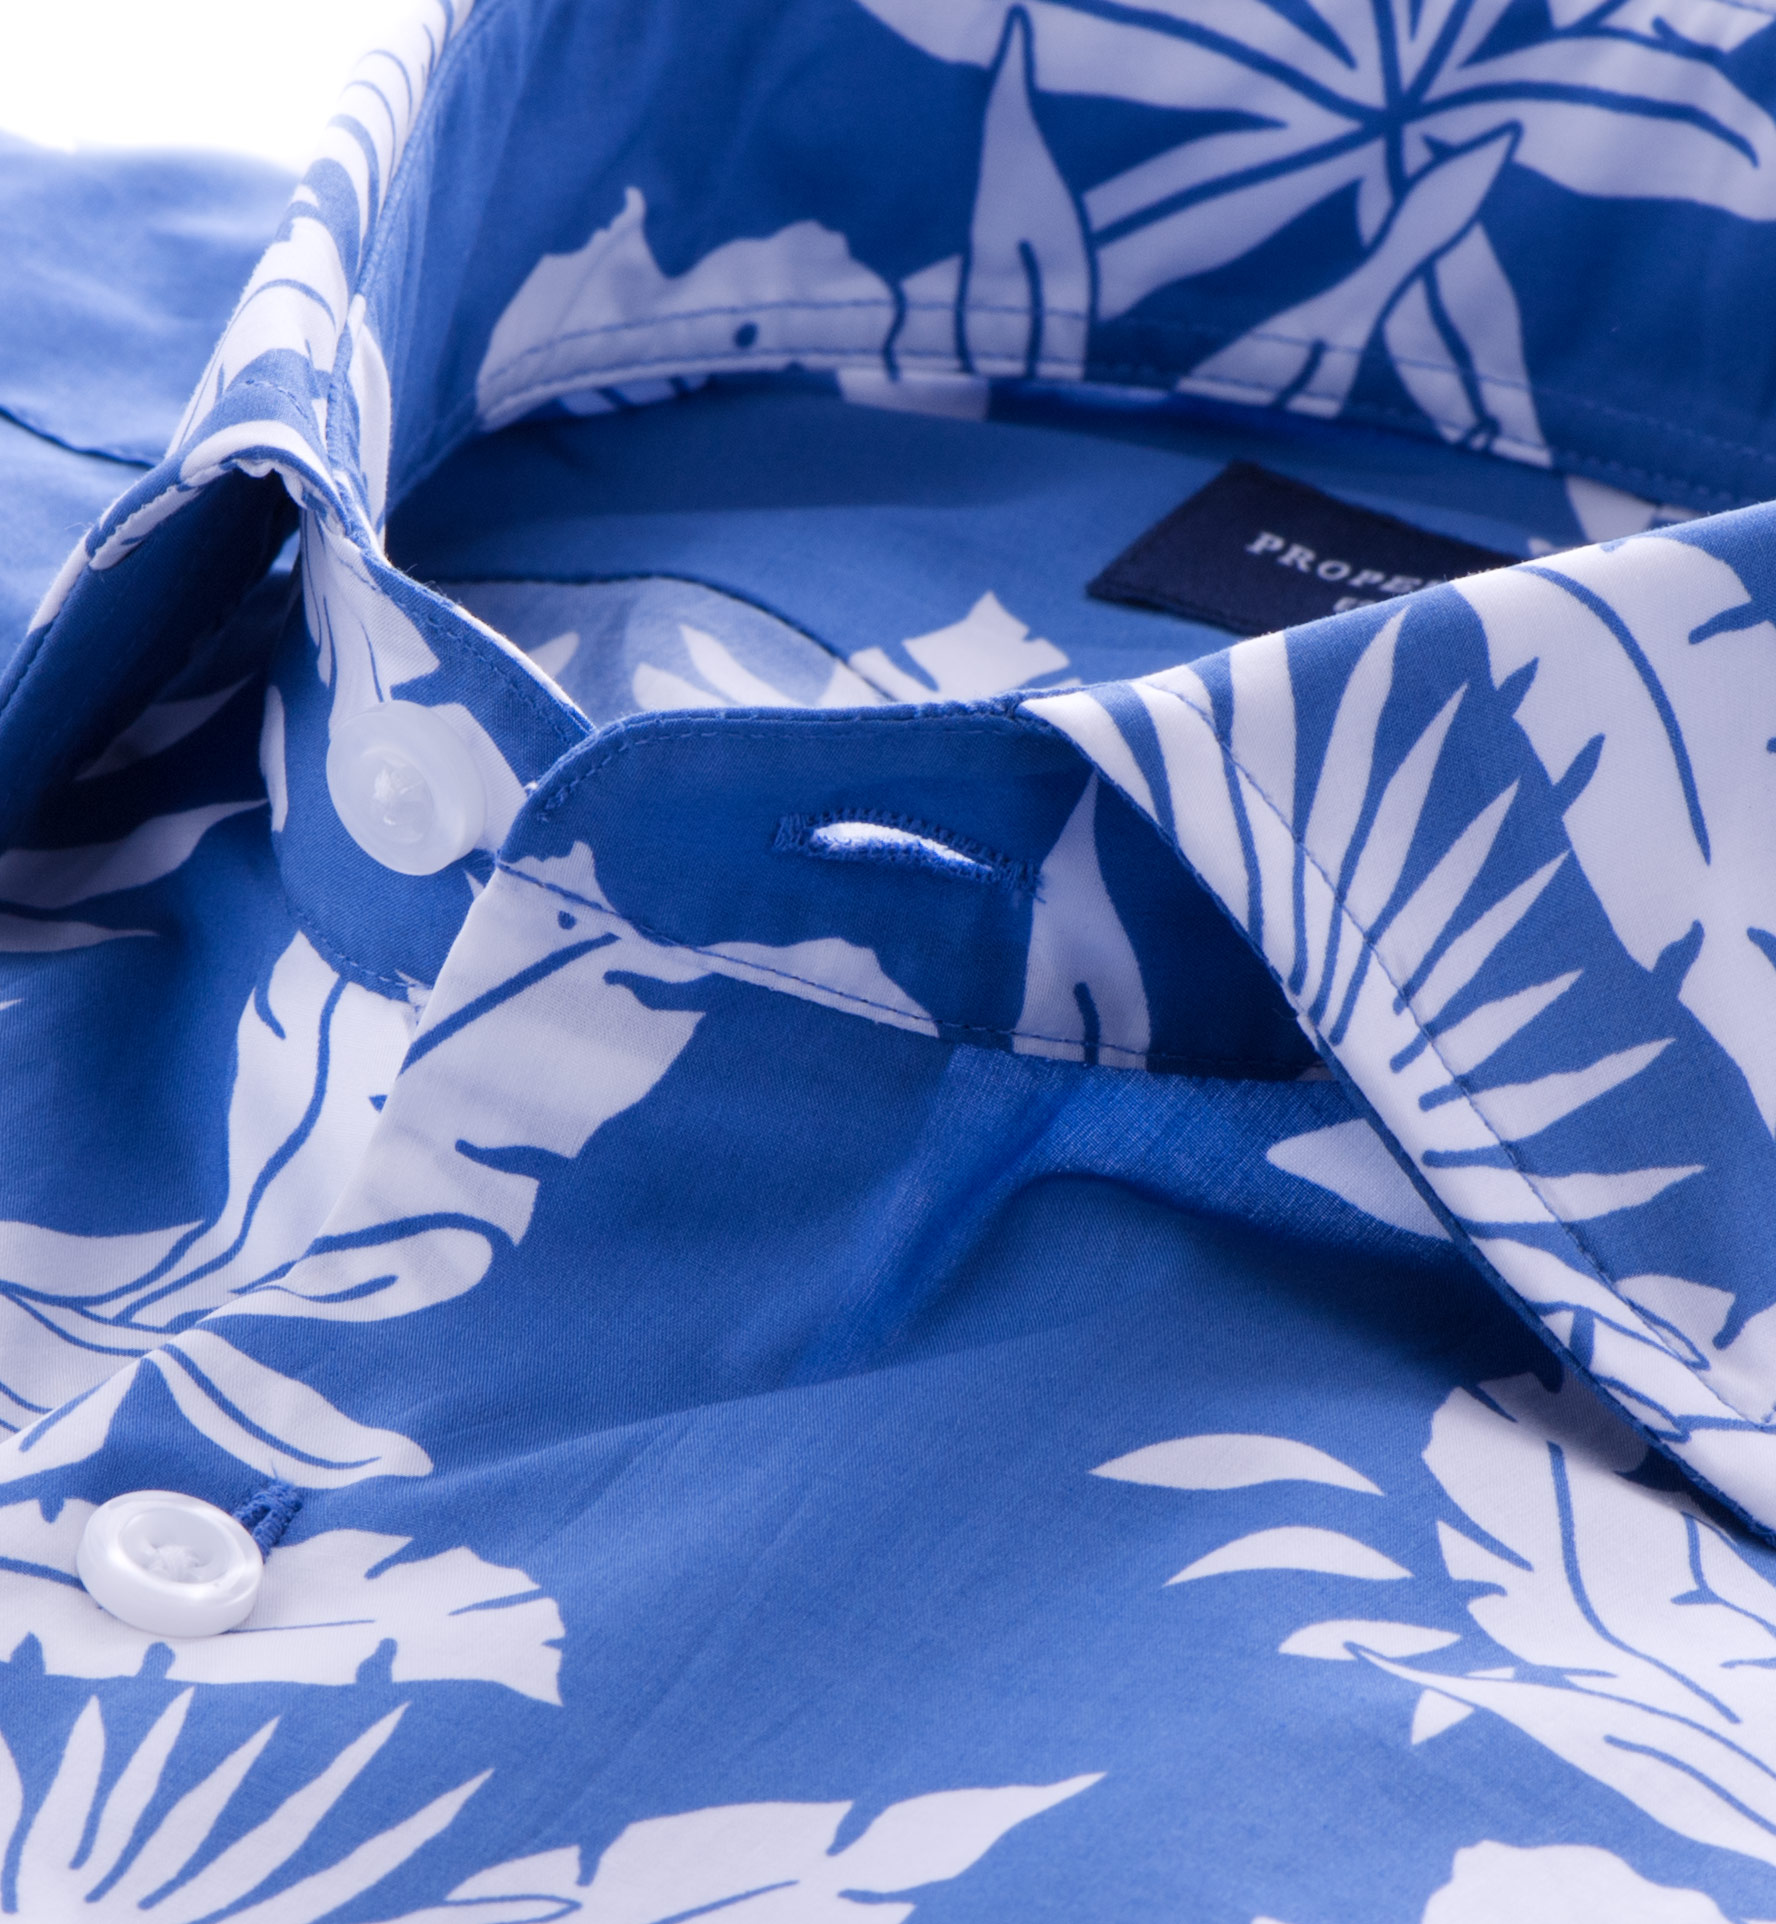 Positano Blue Floral Print Tailor Made Shirt by Proper Cloth